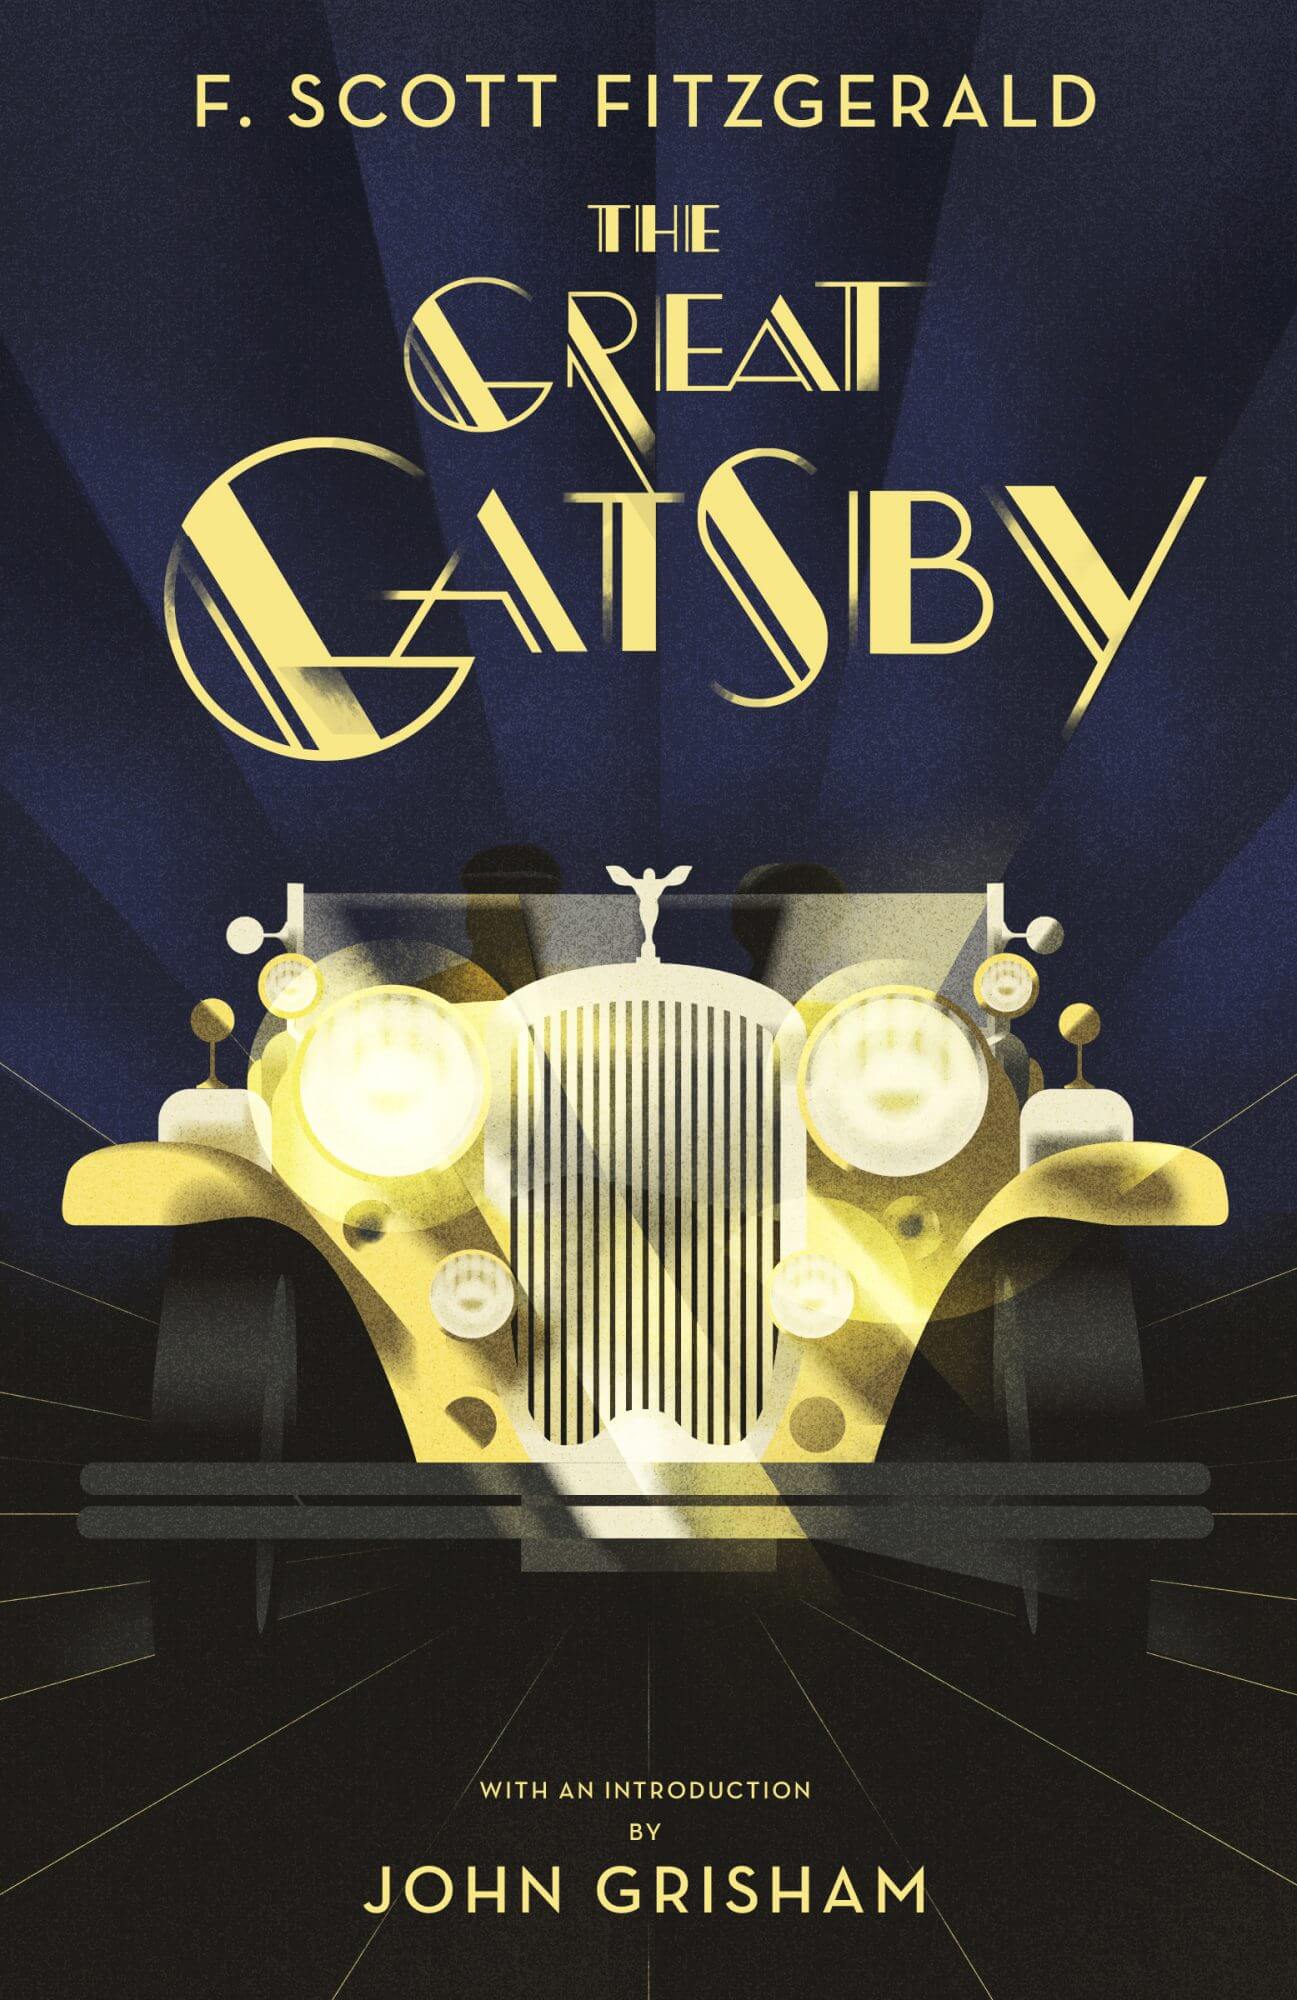 Cover of "The Great Gatsby" with vintage car illustration.